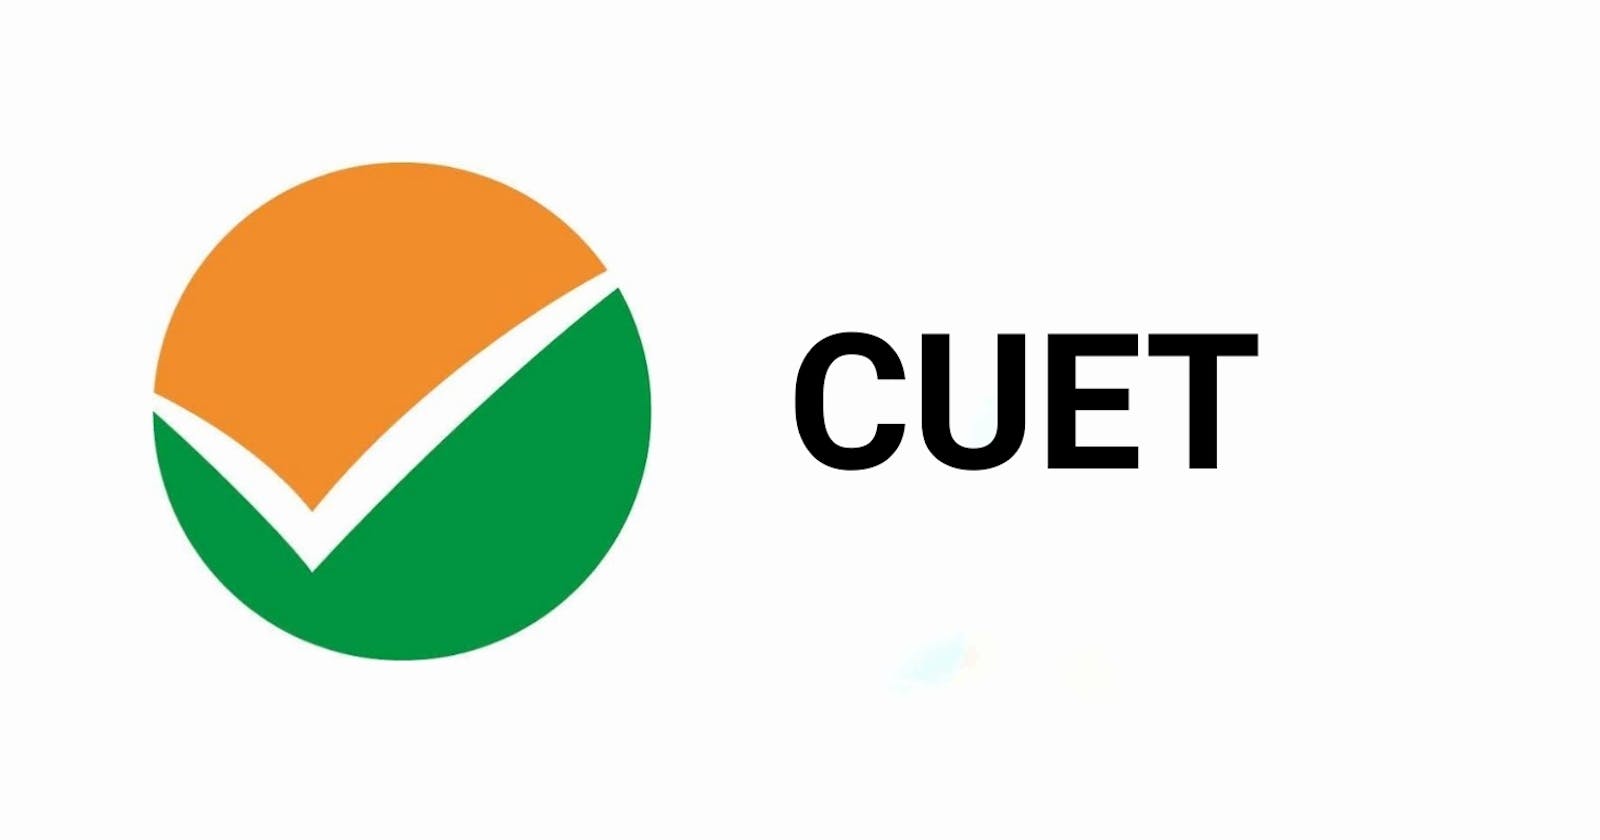 CUET Exam: Tips & Tricks To Crack The Test